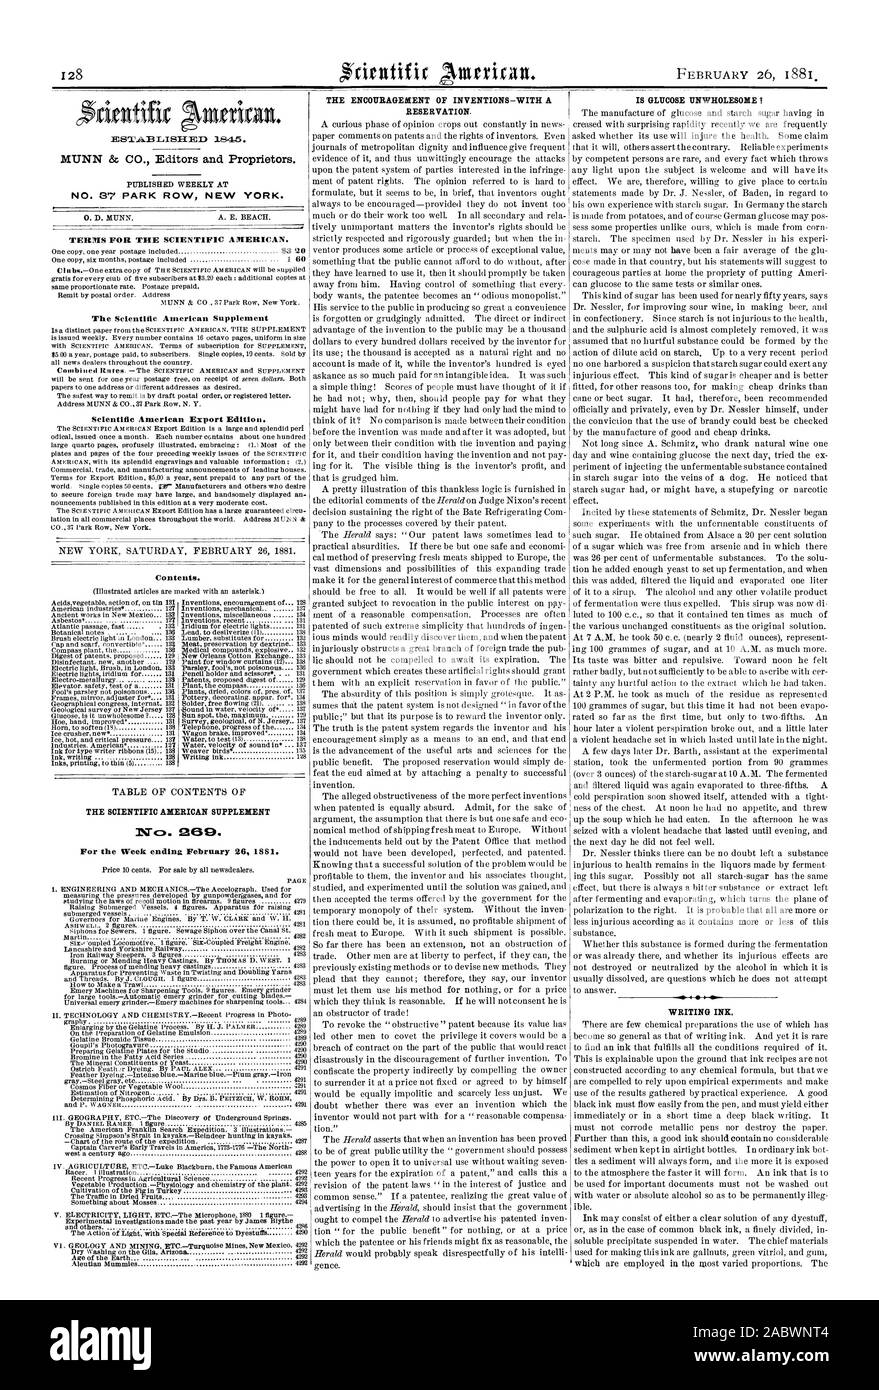 IBST'AB 1ISH EEO 1845. PUBLISHED WEEKLY AT 0. D. MUNN. A. E. BEACH. TERMS FOR THE SCIENTIFIC AMERICAN. The Scientific American Supplement Scientific American Export Edition. Contents. THE SCIENTIFIC AMERICAN SUPPLEMENT 1%Tcy. 209. For the Week ending February 26 1861. THE ENCOURAGEMENT OF INVENTIONS—WITH A WRITING INK., 1881-02-26 Stock Photo